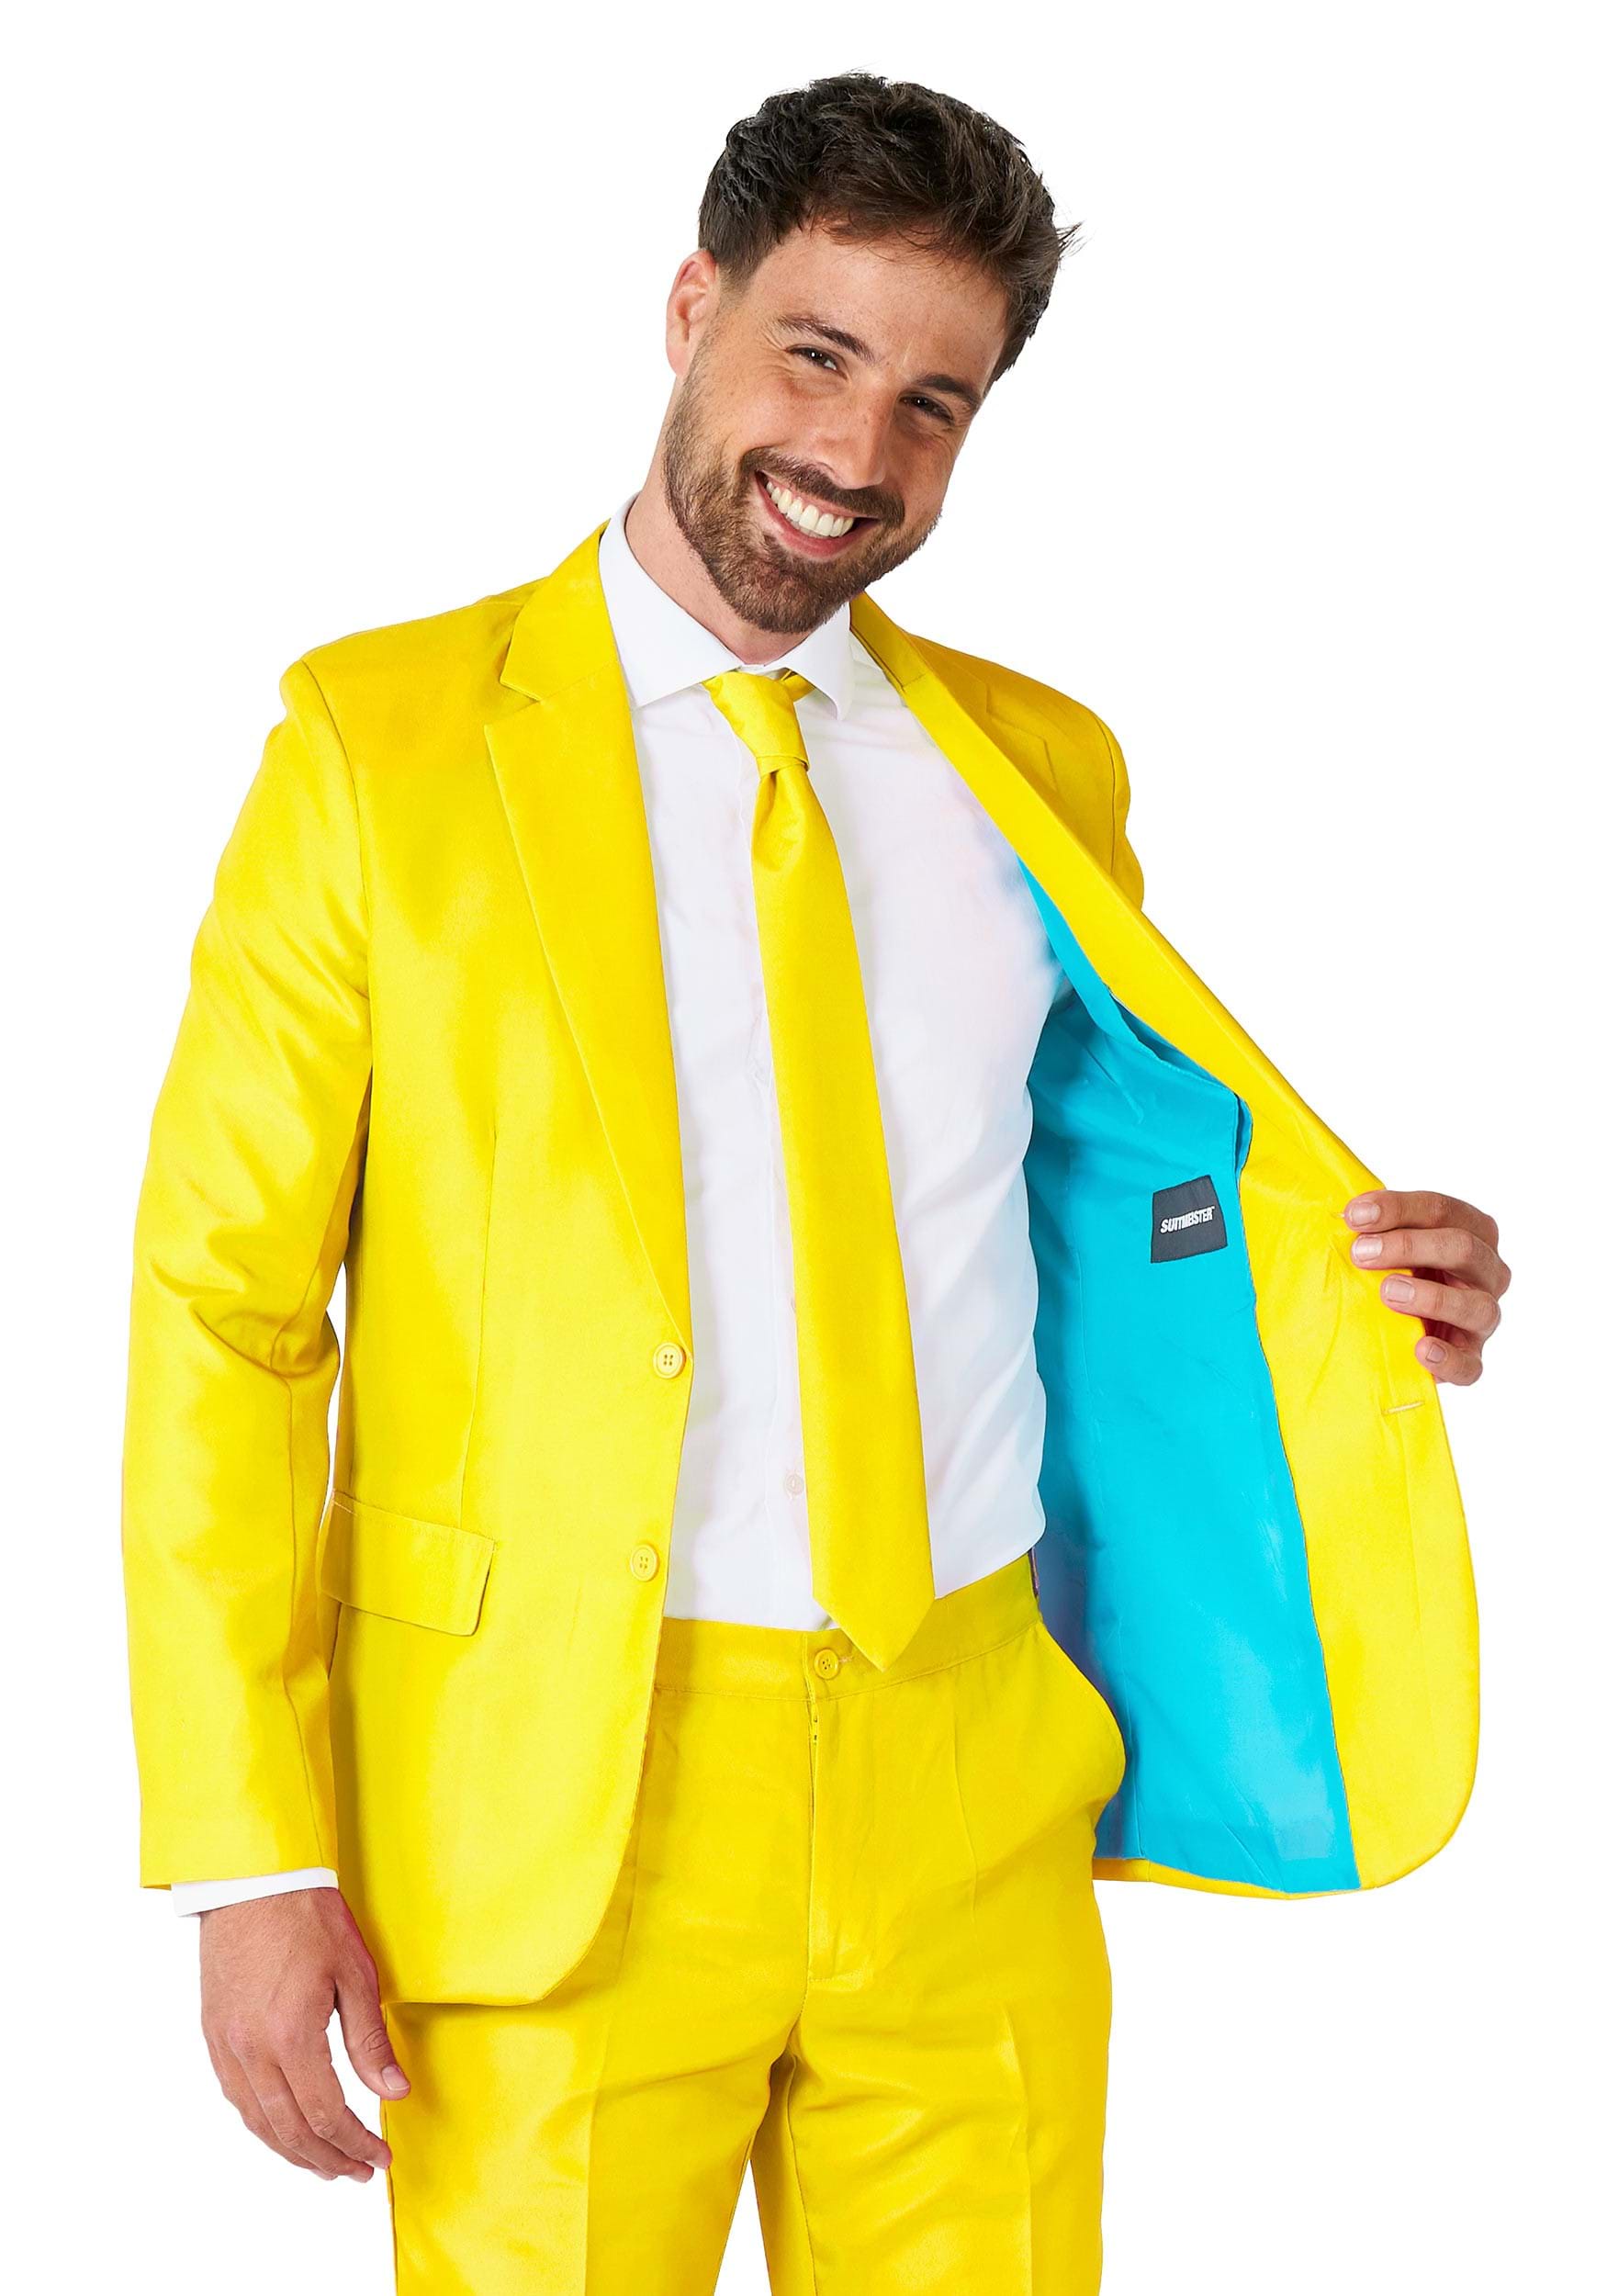 Bright Yellow One Button Tuxedo Suit For Plus Size Men Perfect For Summer  Weddings, Proms, And Parties Includes Custom Jackets And Pants From  Dresstop, $76.98 | DHgate.Com